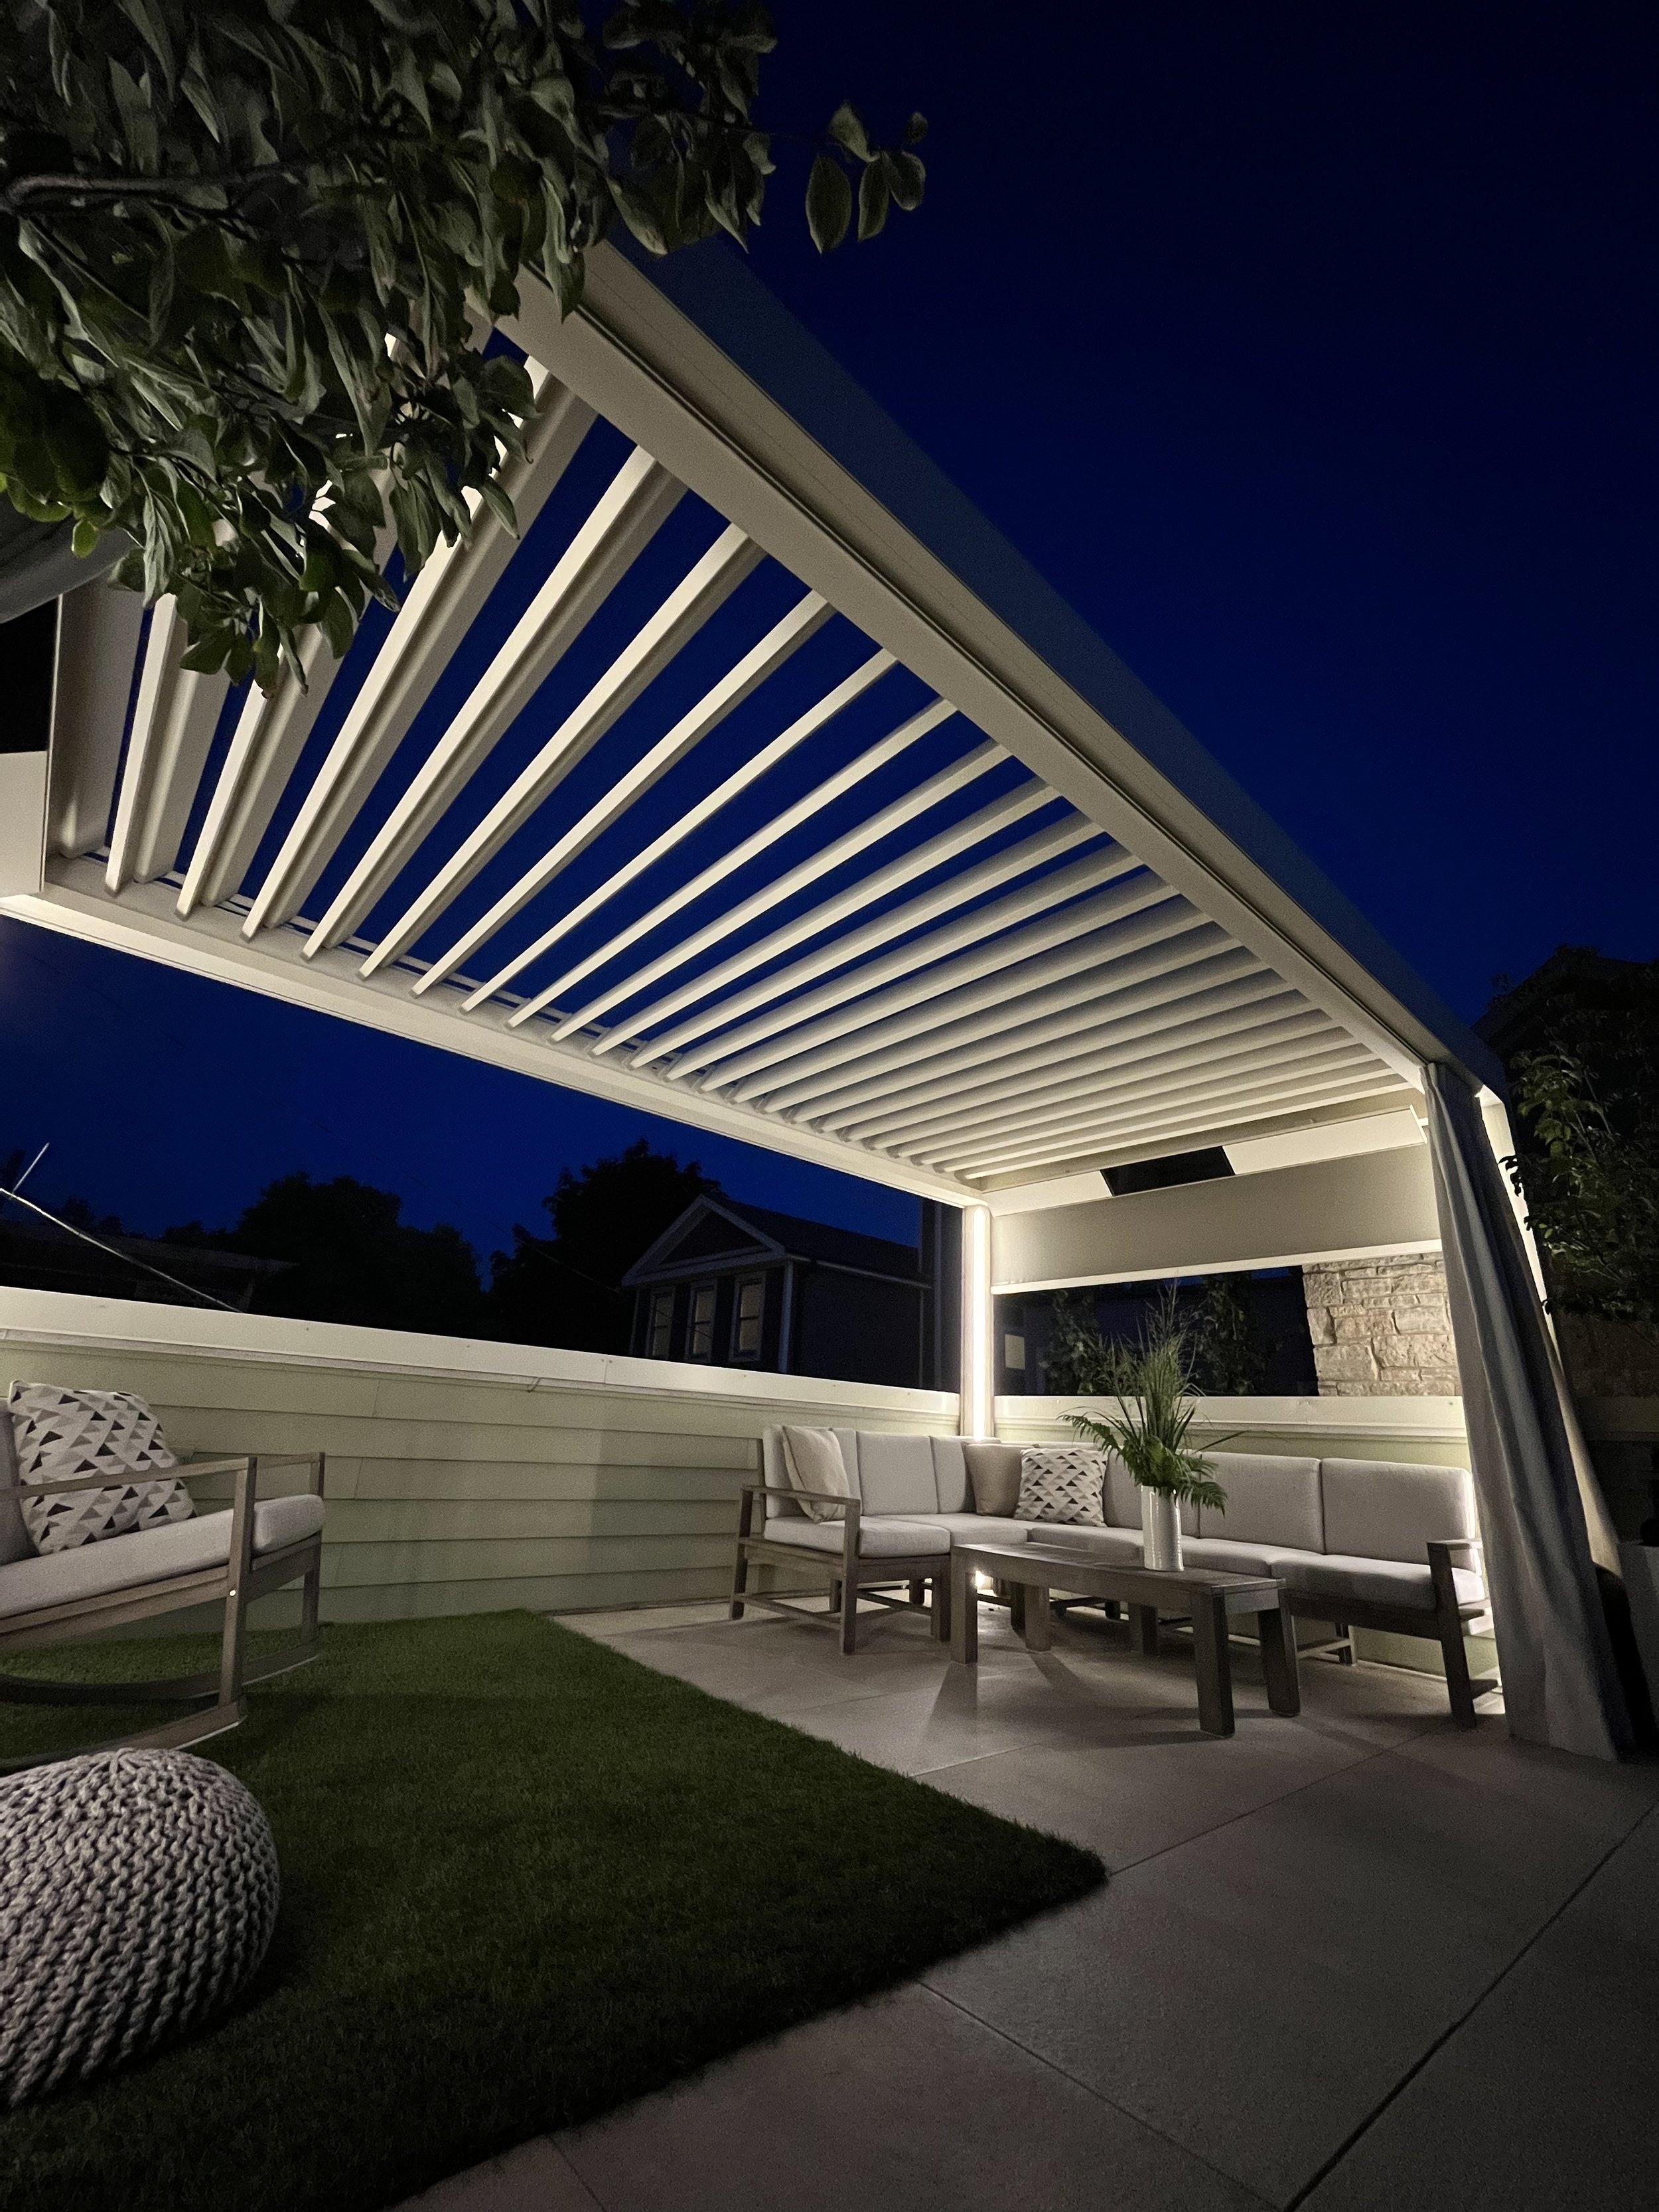 Rooftopia-chicago-lakeview-rooftop-deck-renson-louvered-pergola-luxury-outdoorliving.jpeg